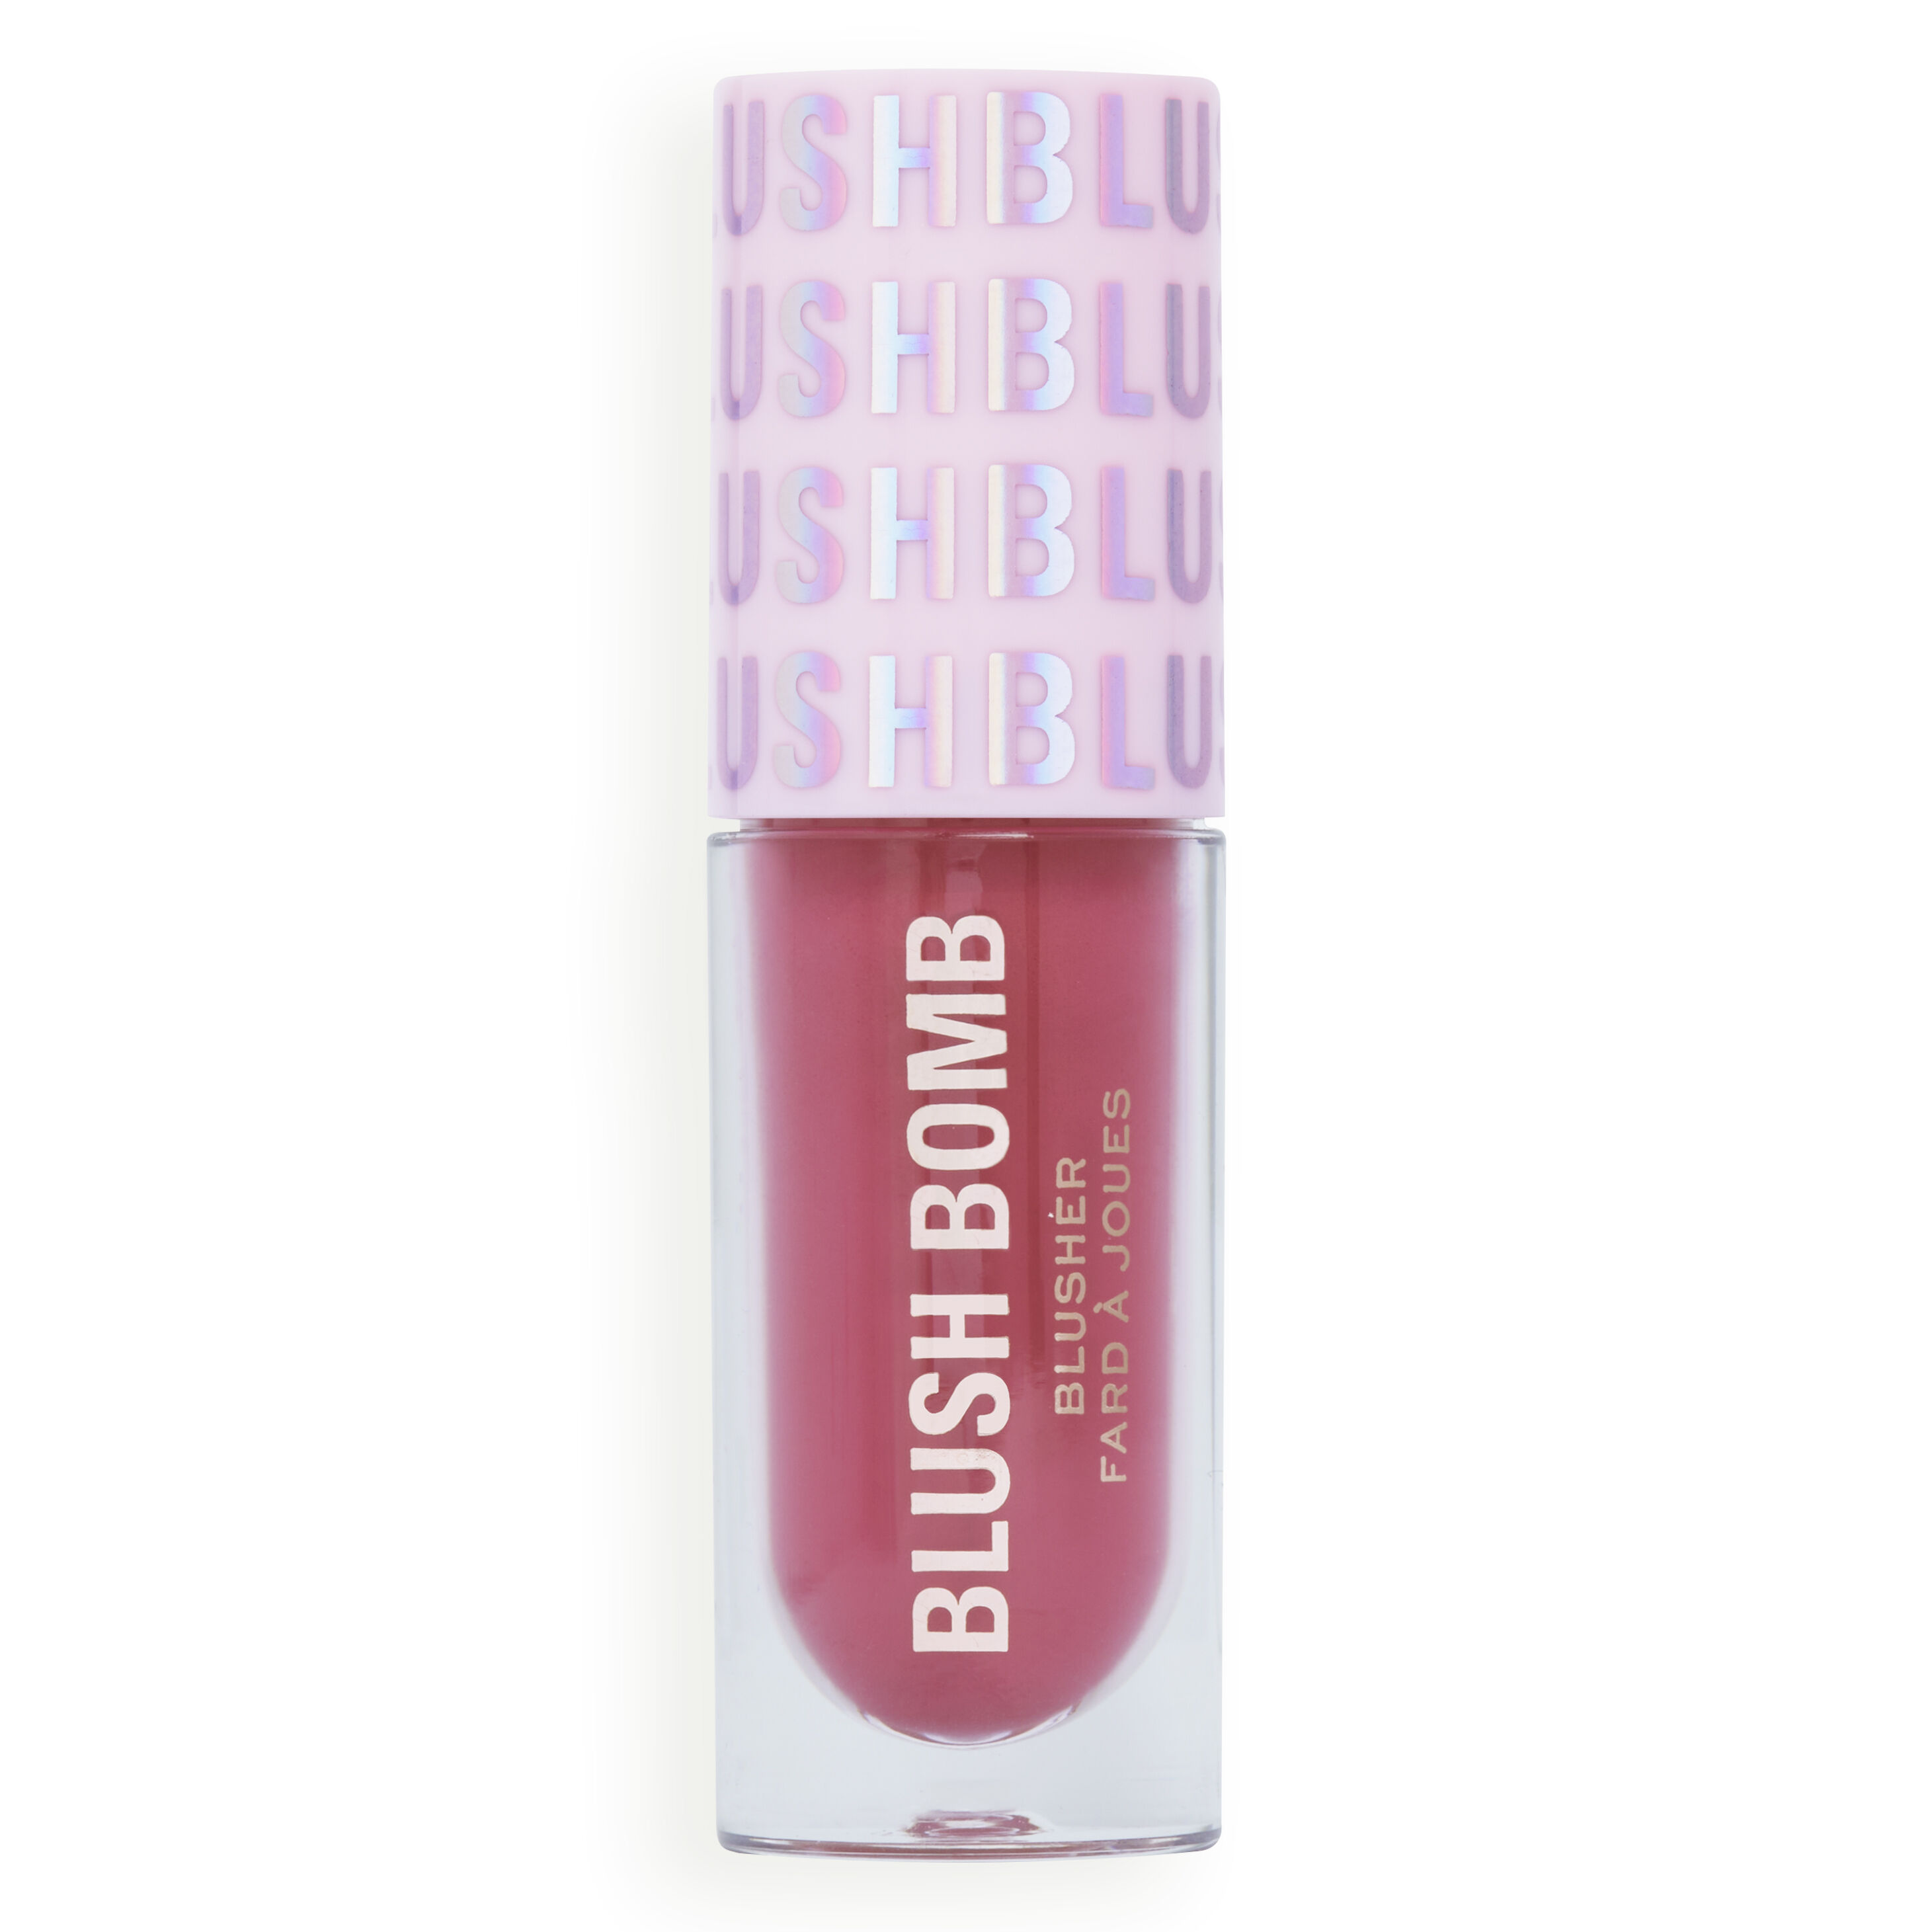 Replying to @piscesbabe210 The Makeup Revolution Blush Balms were just, blush makeup